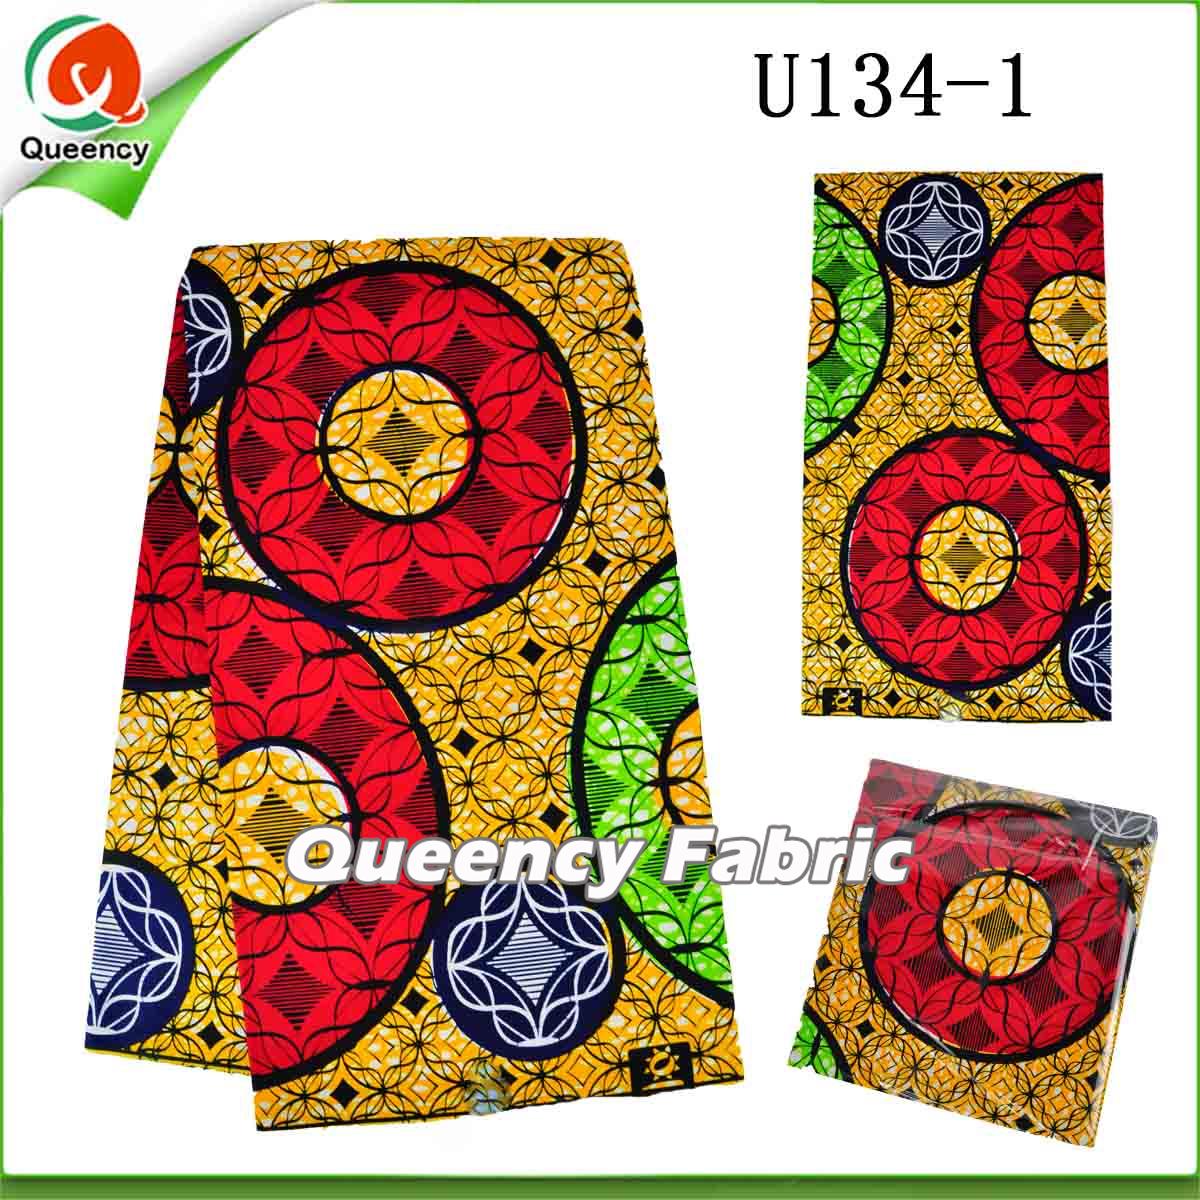 Classic designs for wax fabric